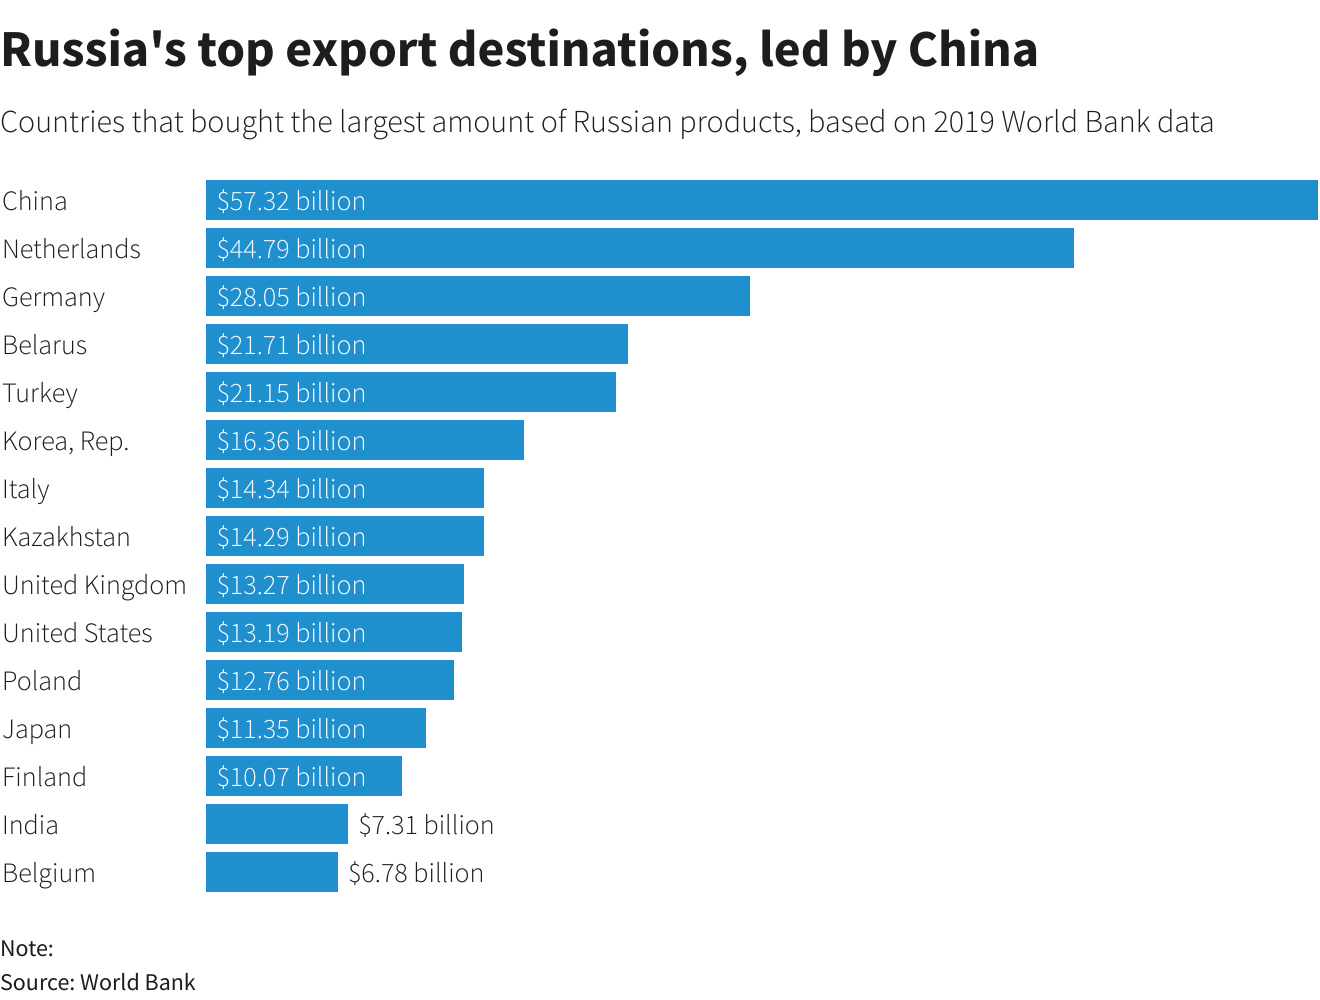 Russia's top export destinations, led by China